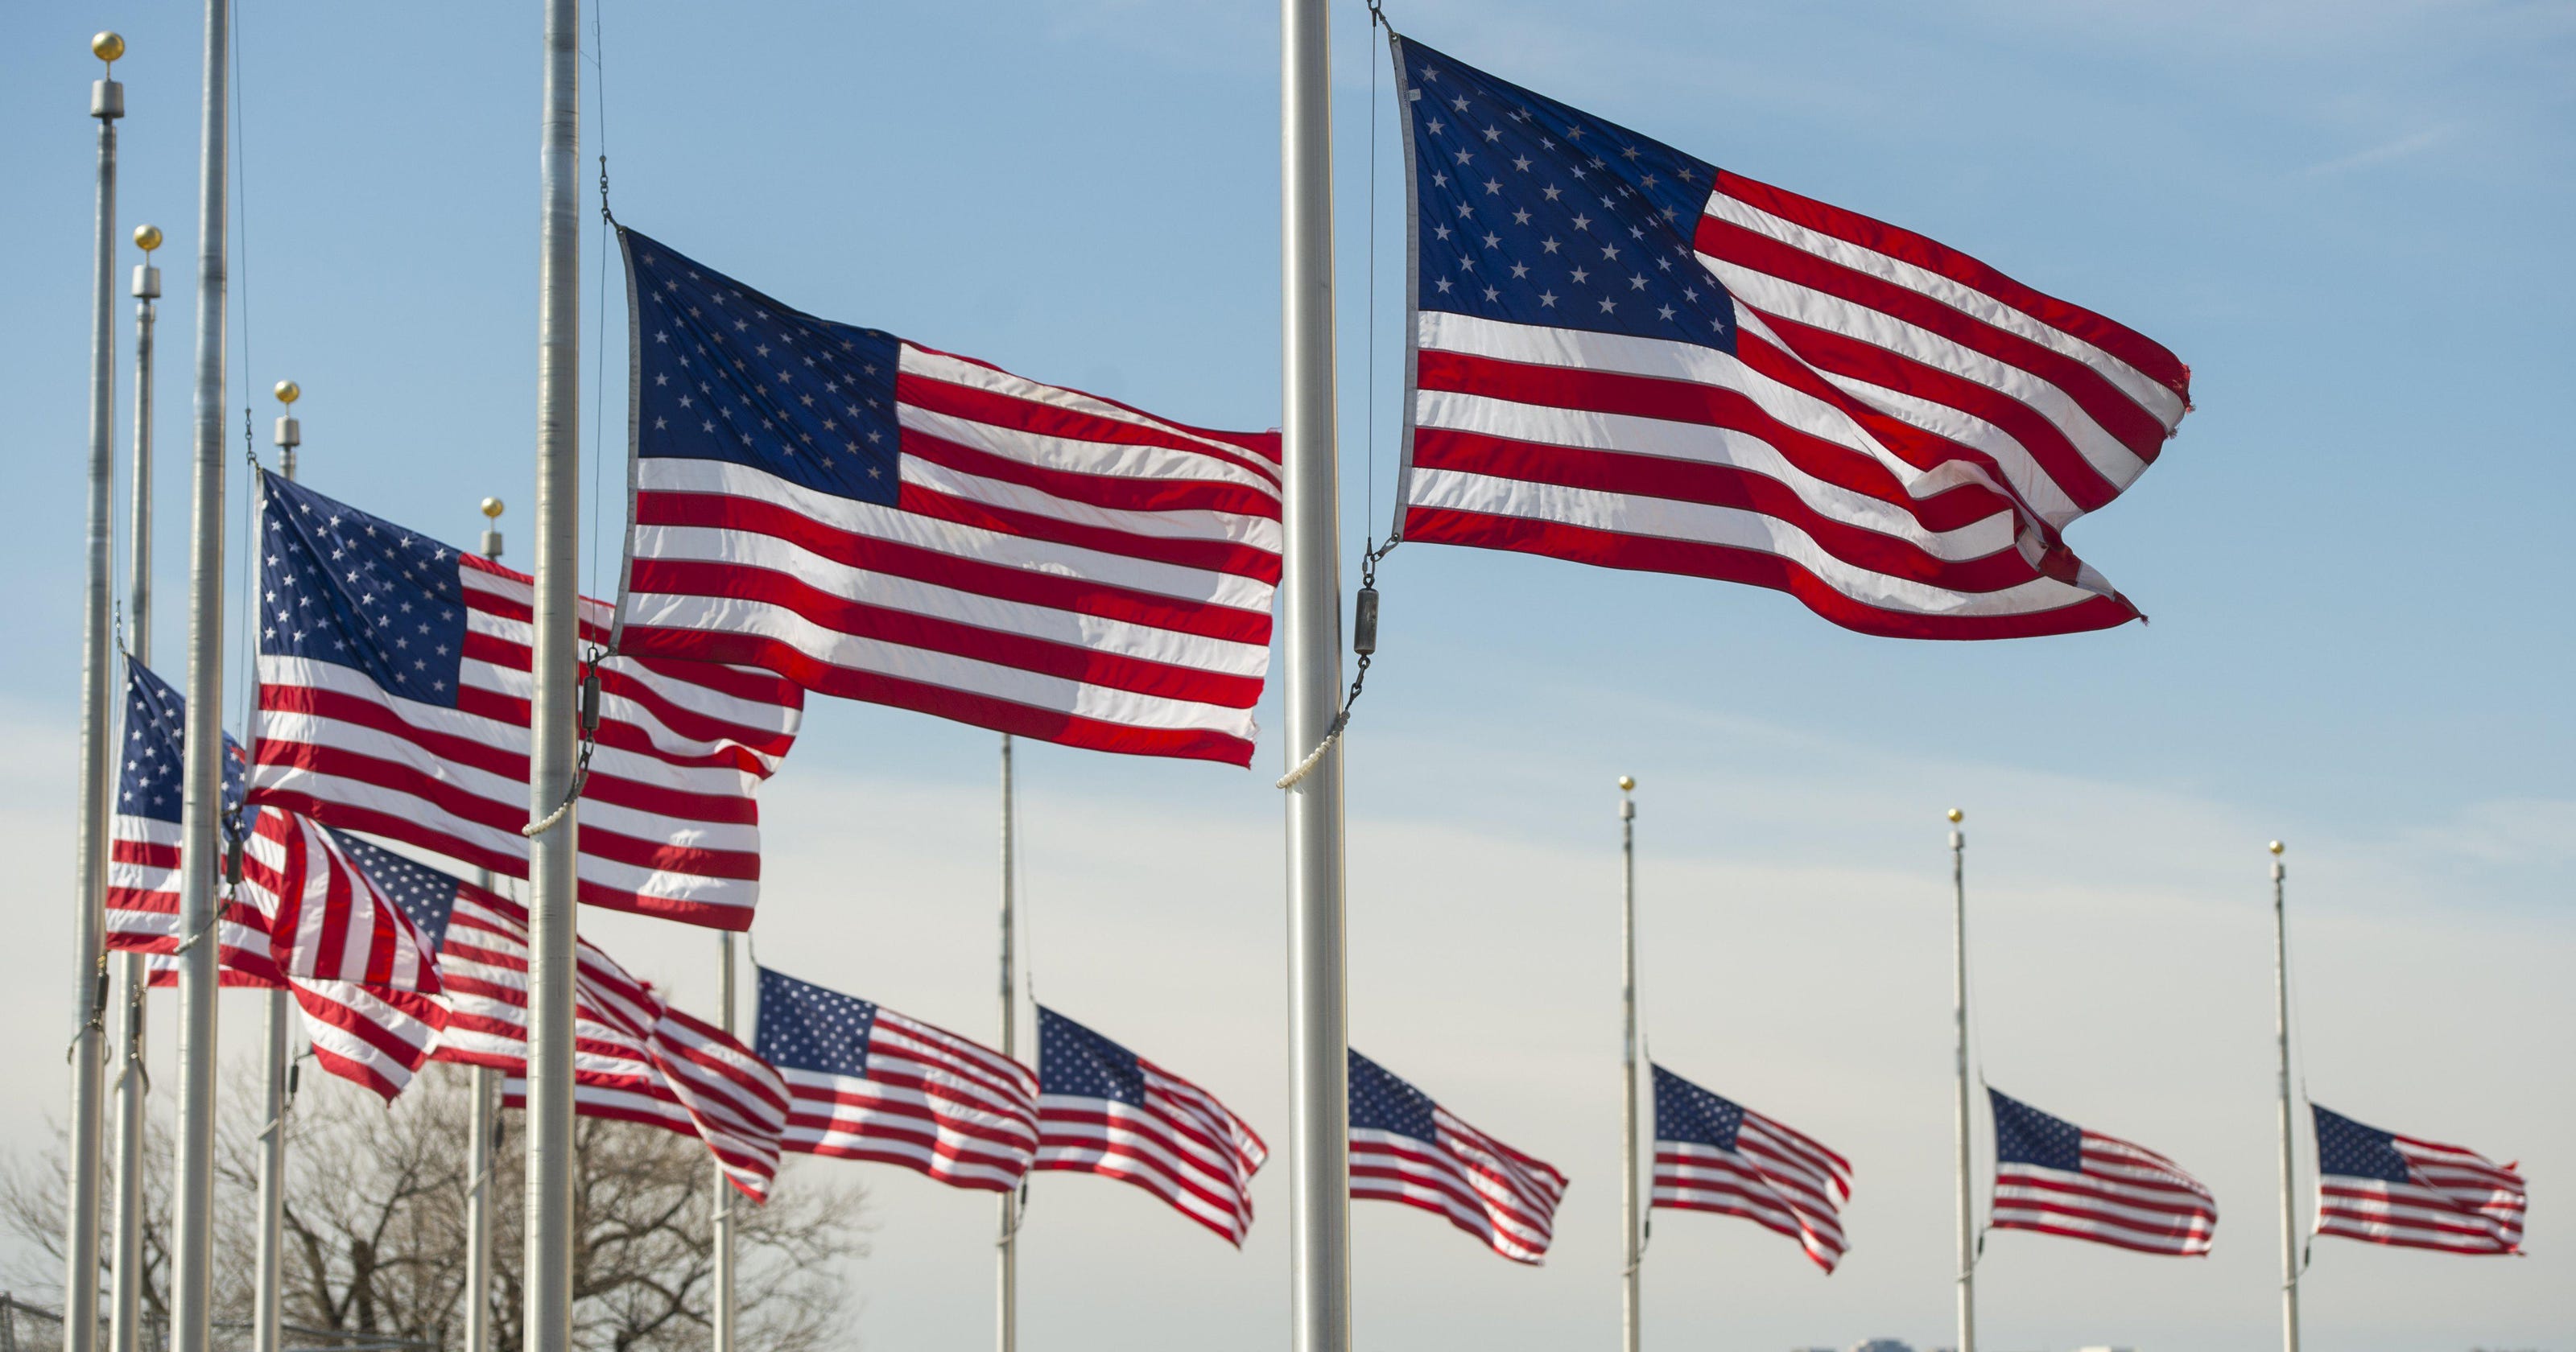 State to honor COVID-19 victims Tuesday, monthly with flags at half-staff